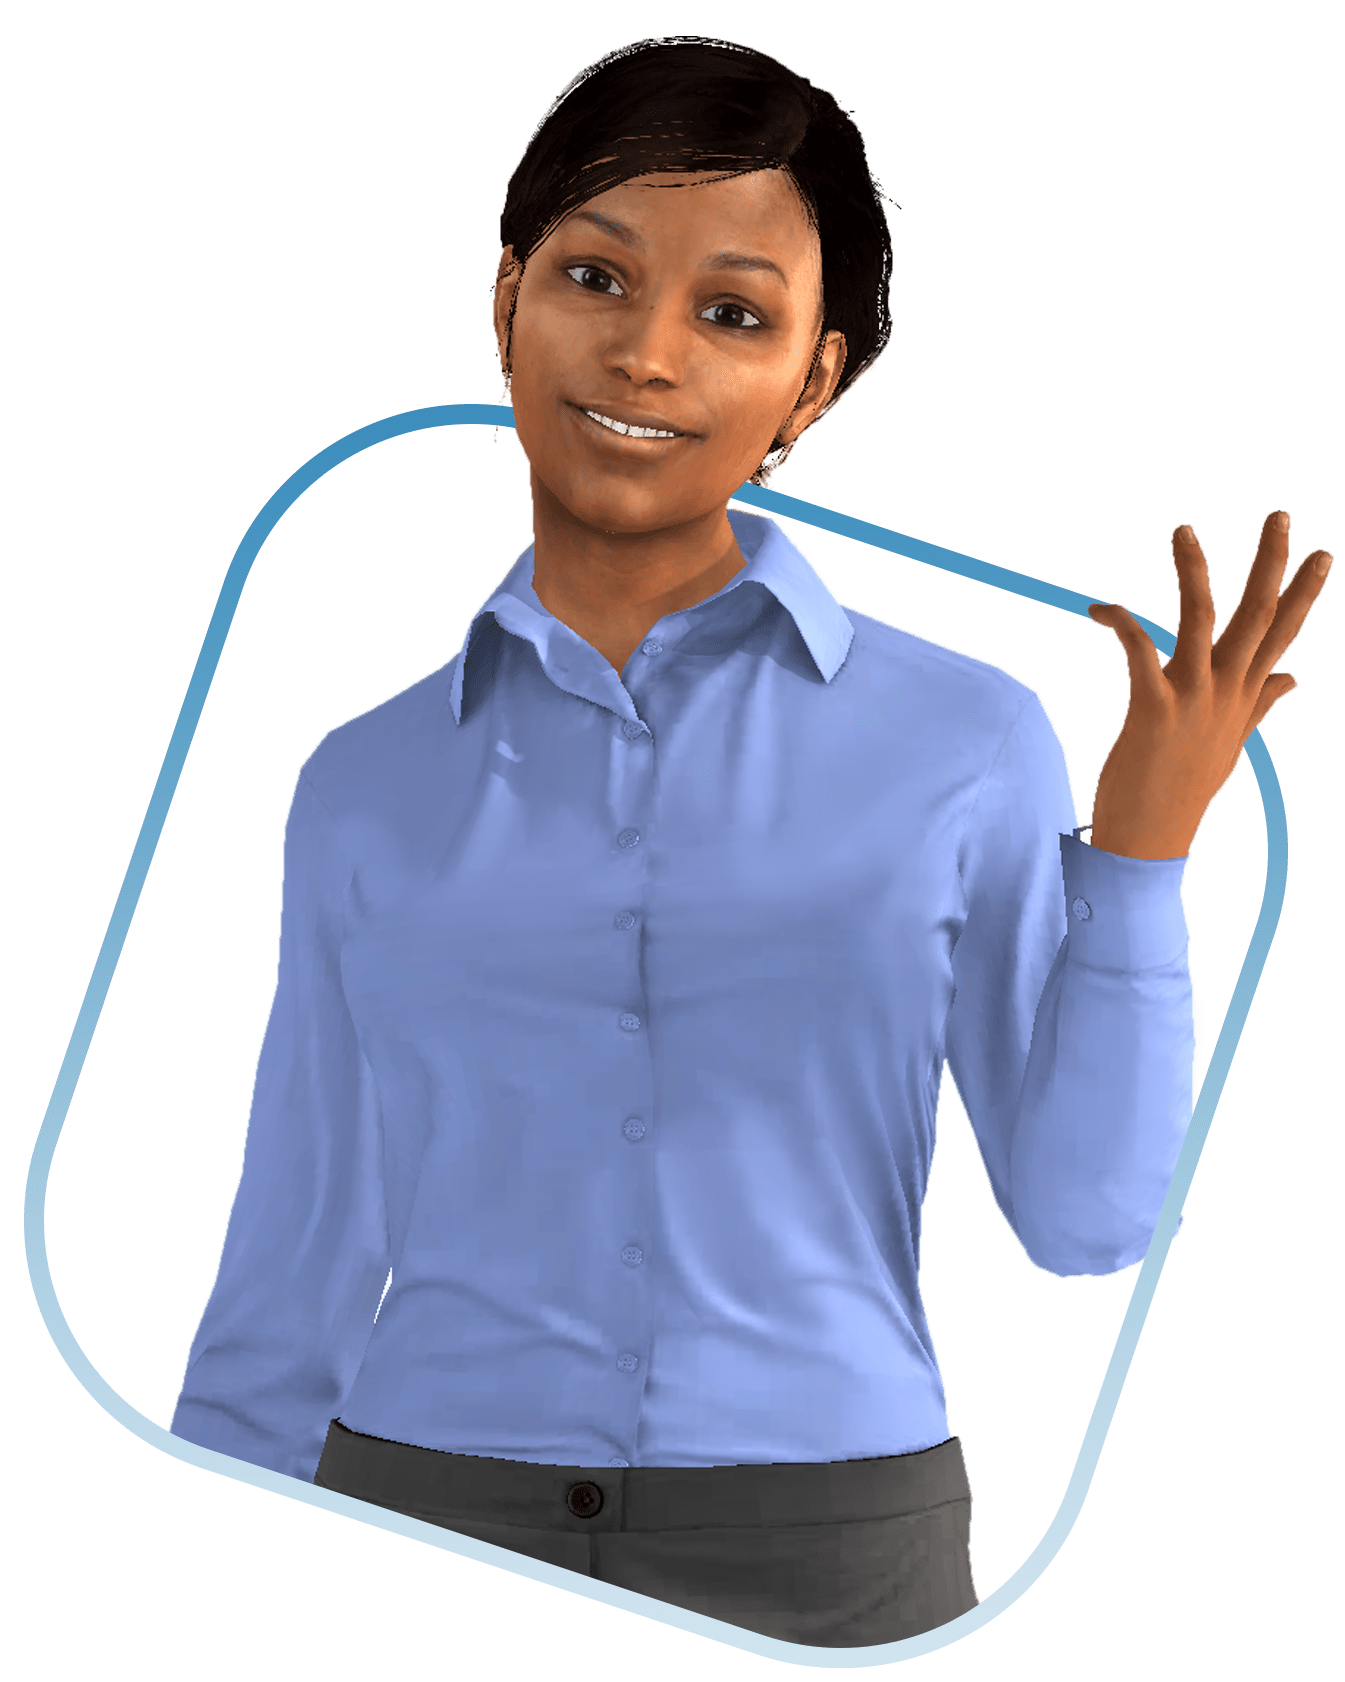 Audrey - Virtual Training Suite character